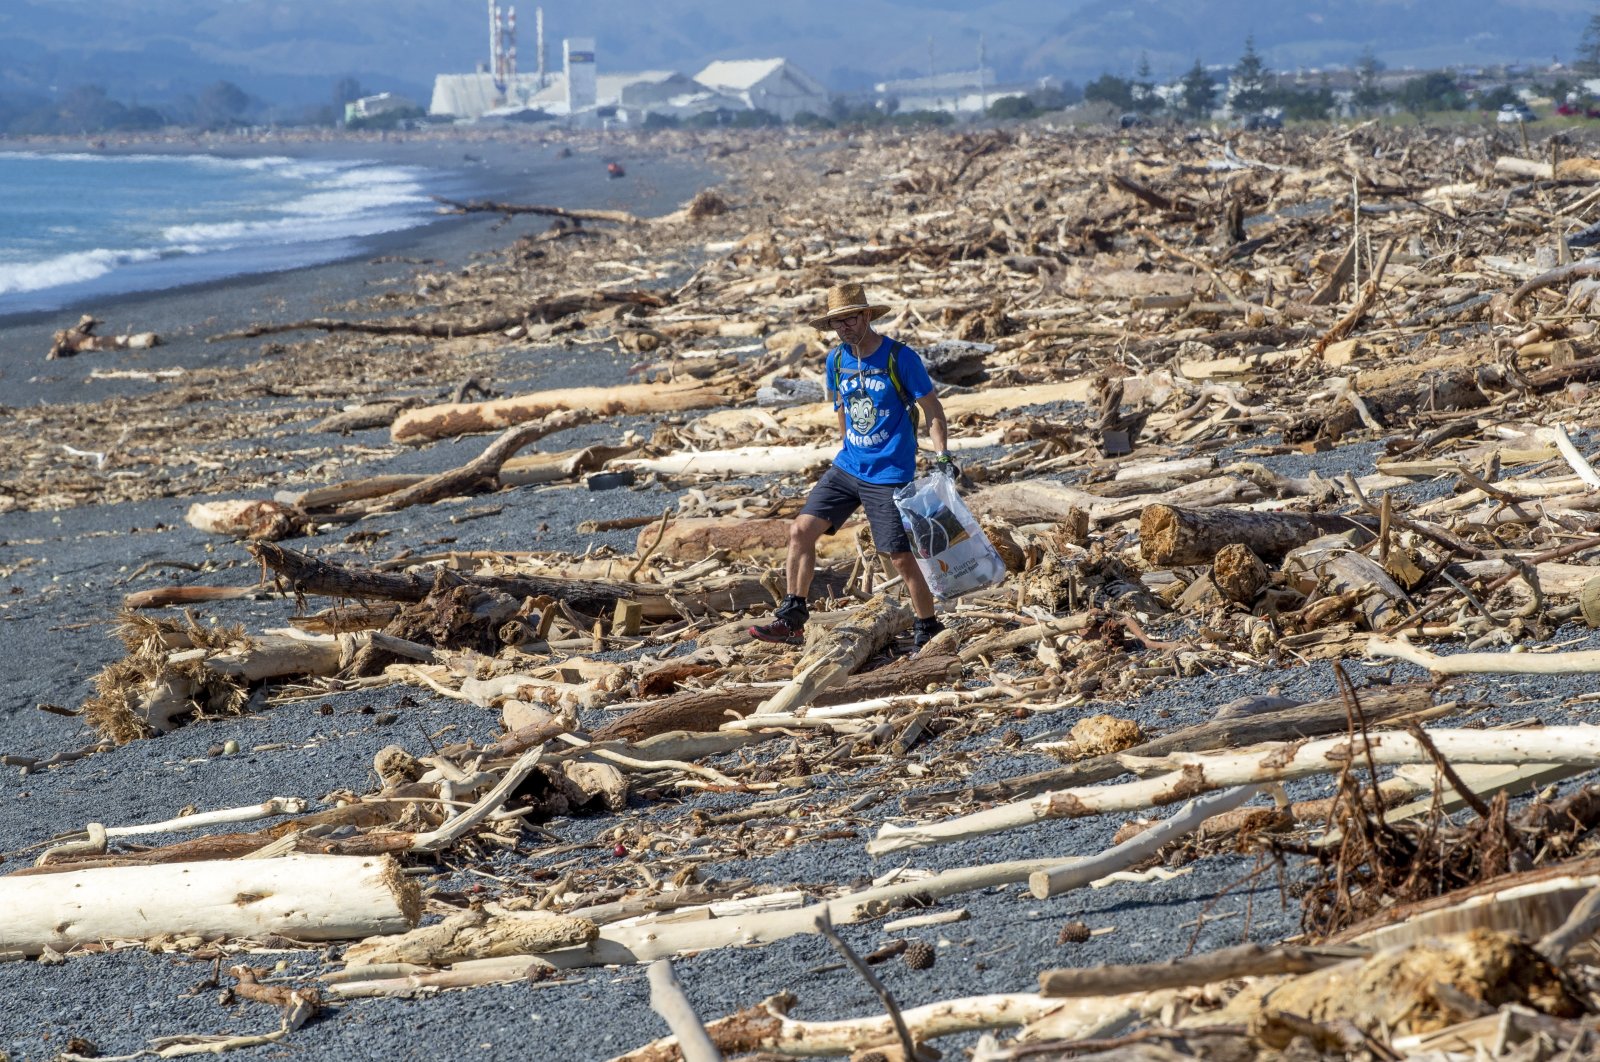 A resident walks among the debris washed ashore from Cyclone Gabrielle, Napier, New Zealand, Feb. 19, 2023. (AP Photos)